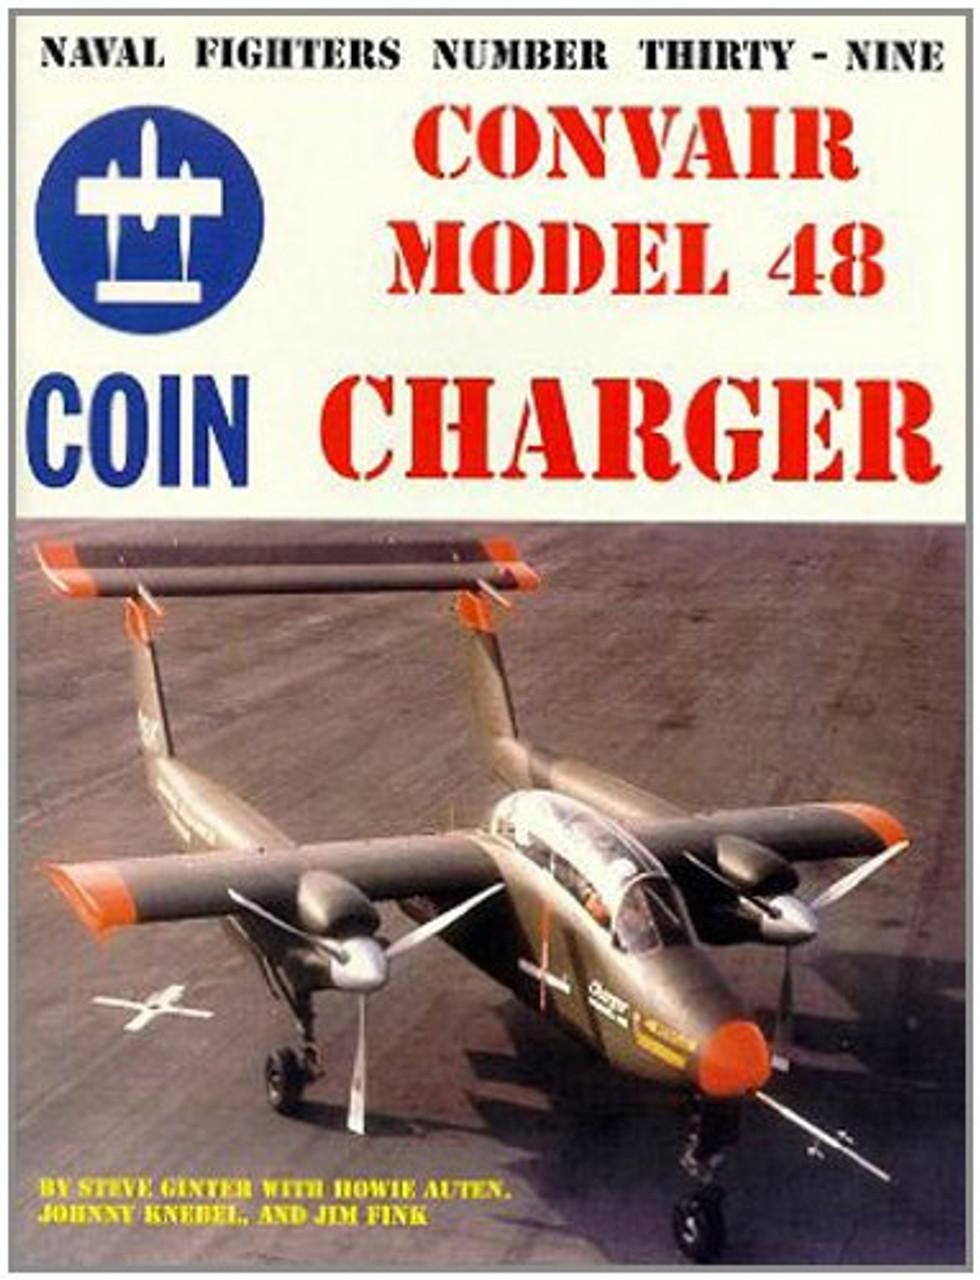 NF039 - Convair Model 48 Charger Coin Aircraft